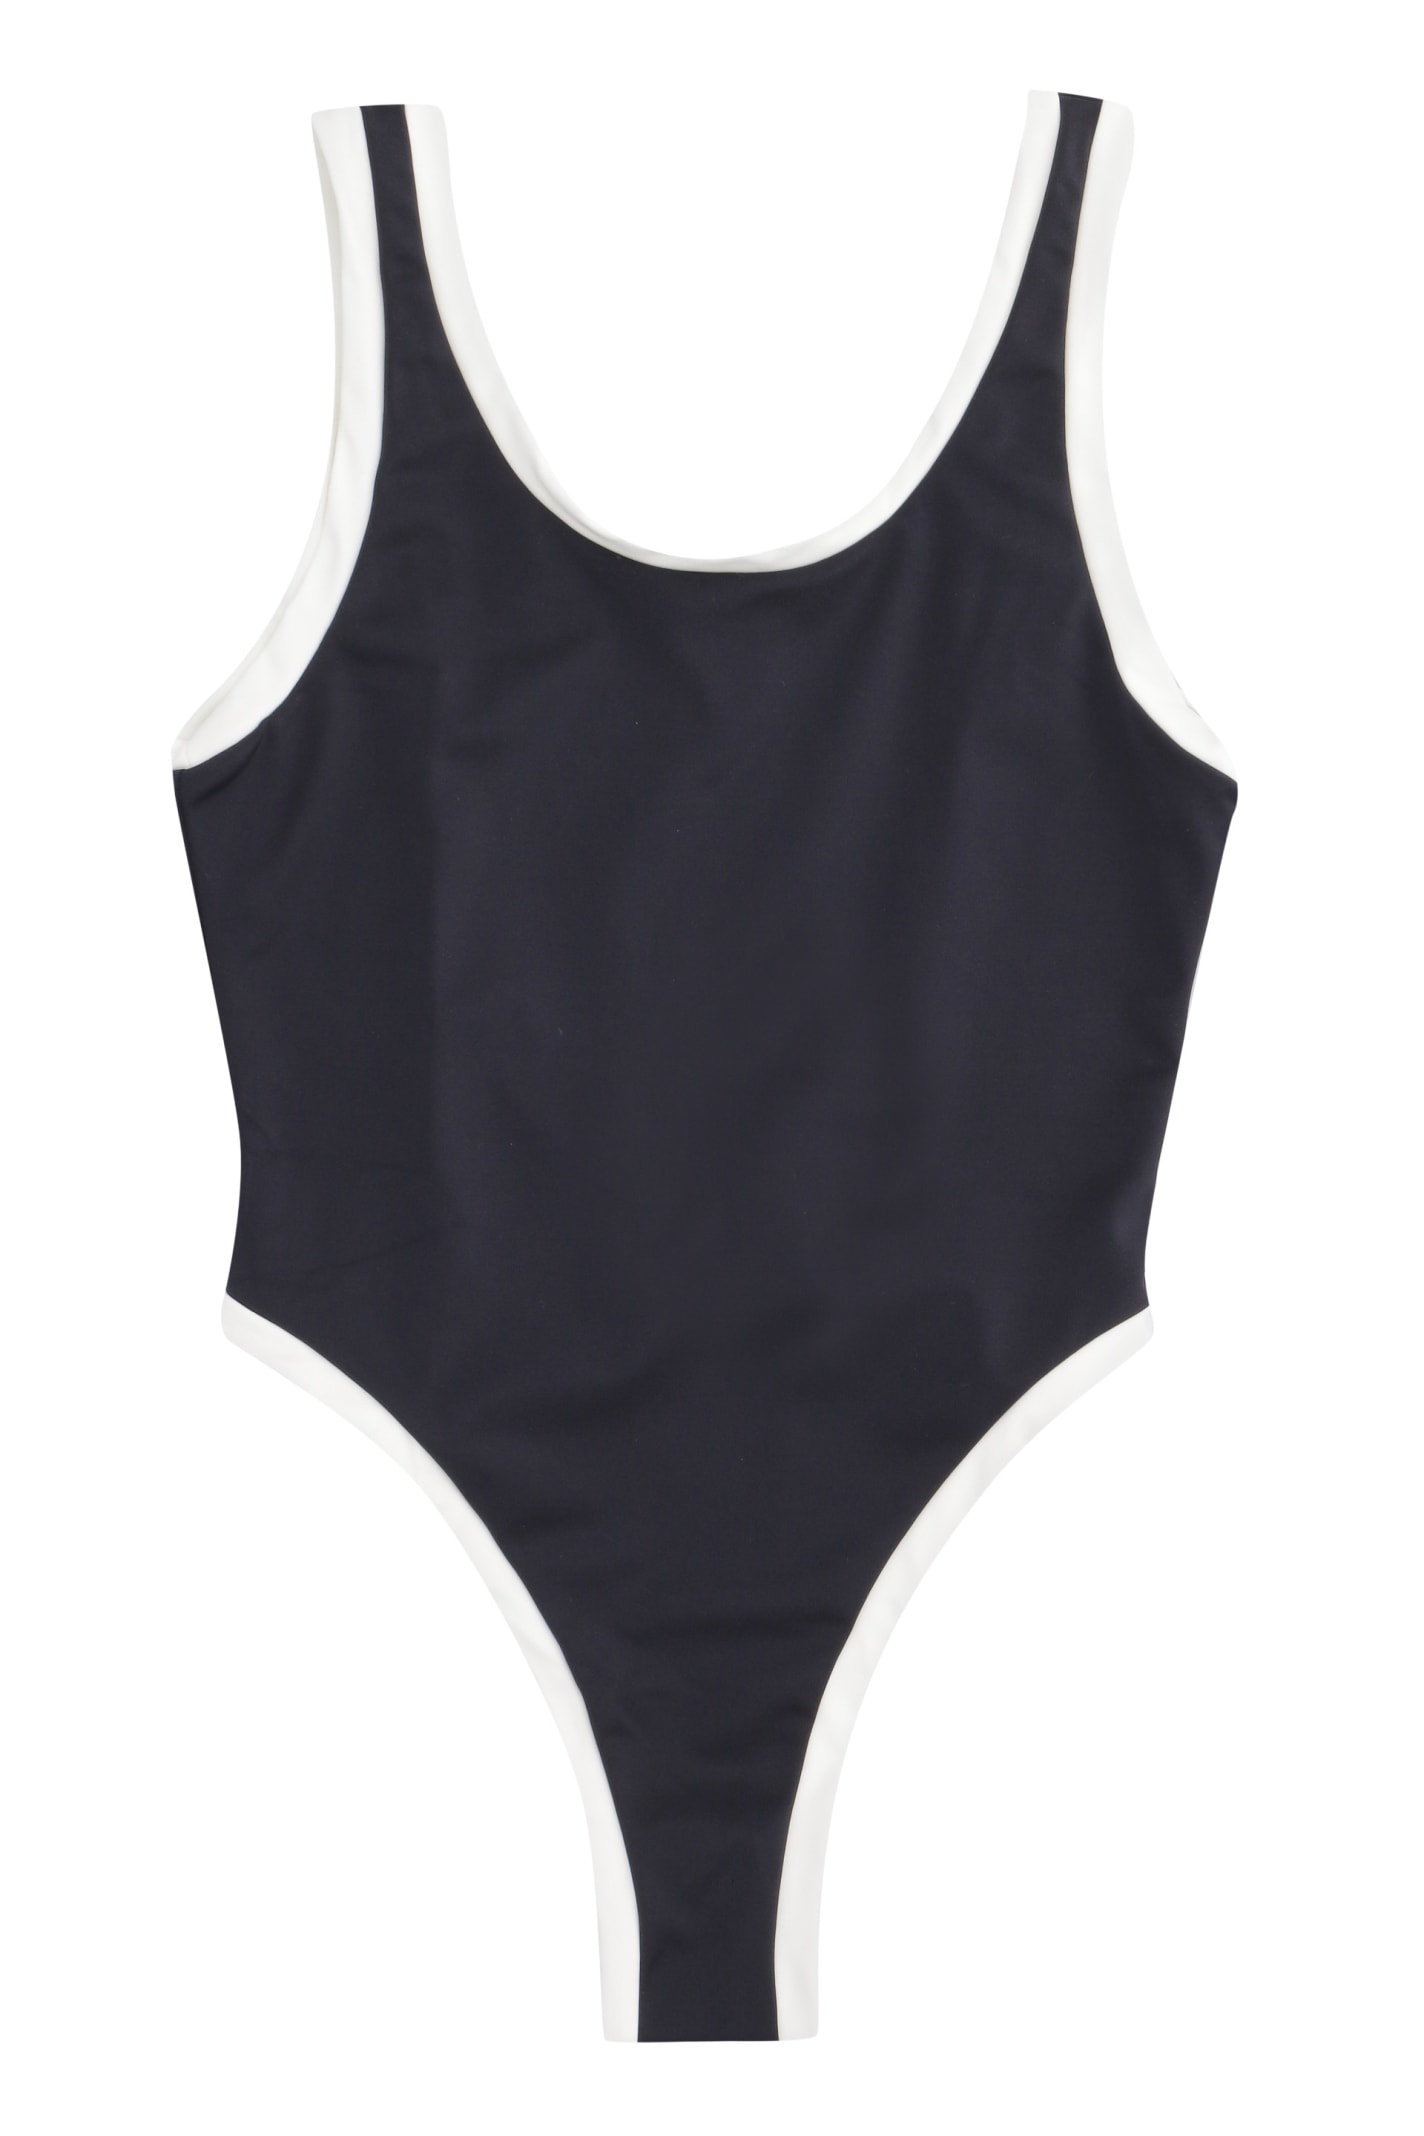 Oseree Eco Sporty Maillot One-piece Swimsuit